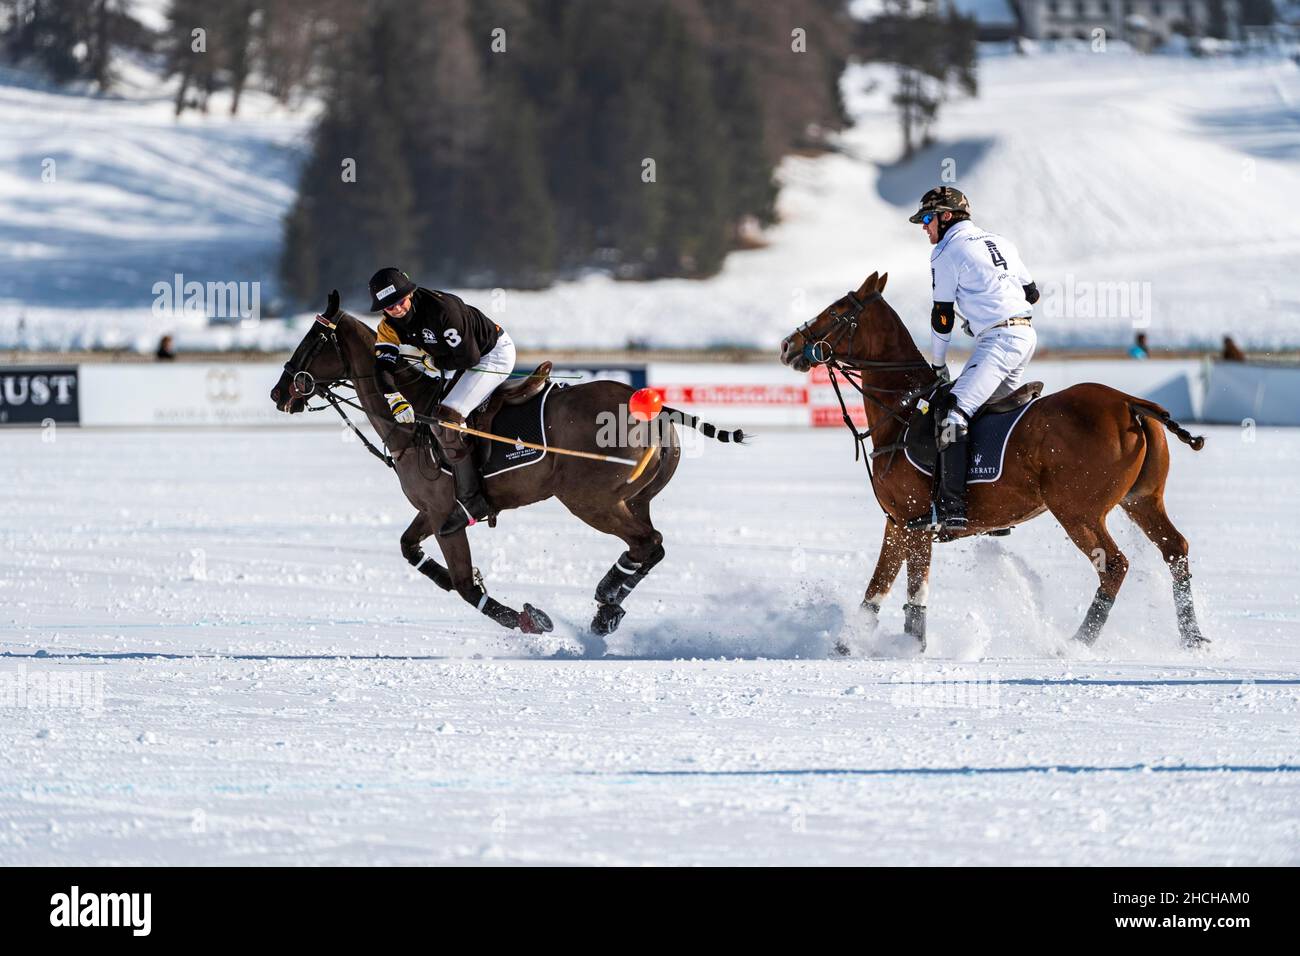 Fabio Meier of Team Maserati chases Nic Roldan (black) of Team Badrutt's Palace Hotel trying to hit the ball, 36th Snow Polo World Cup St. Moritz Stock Photo